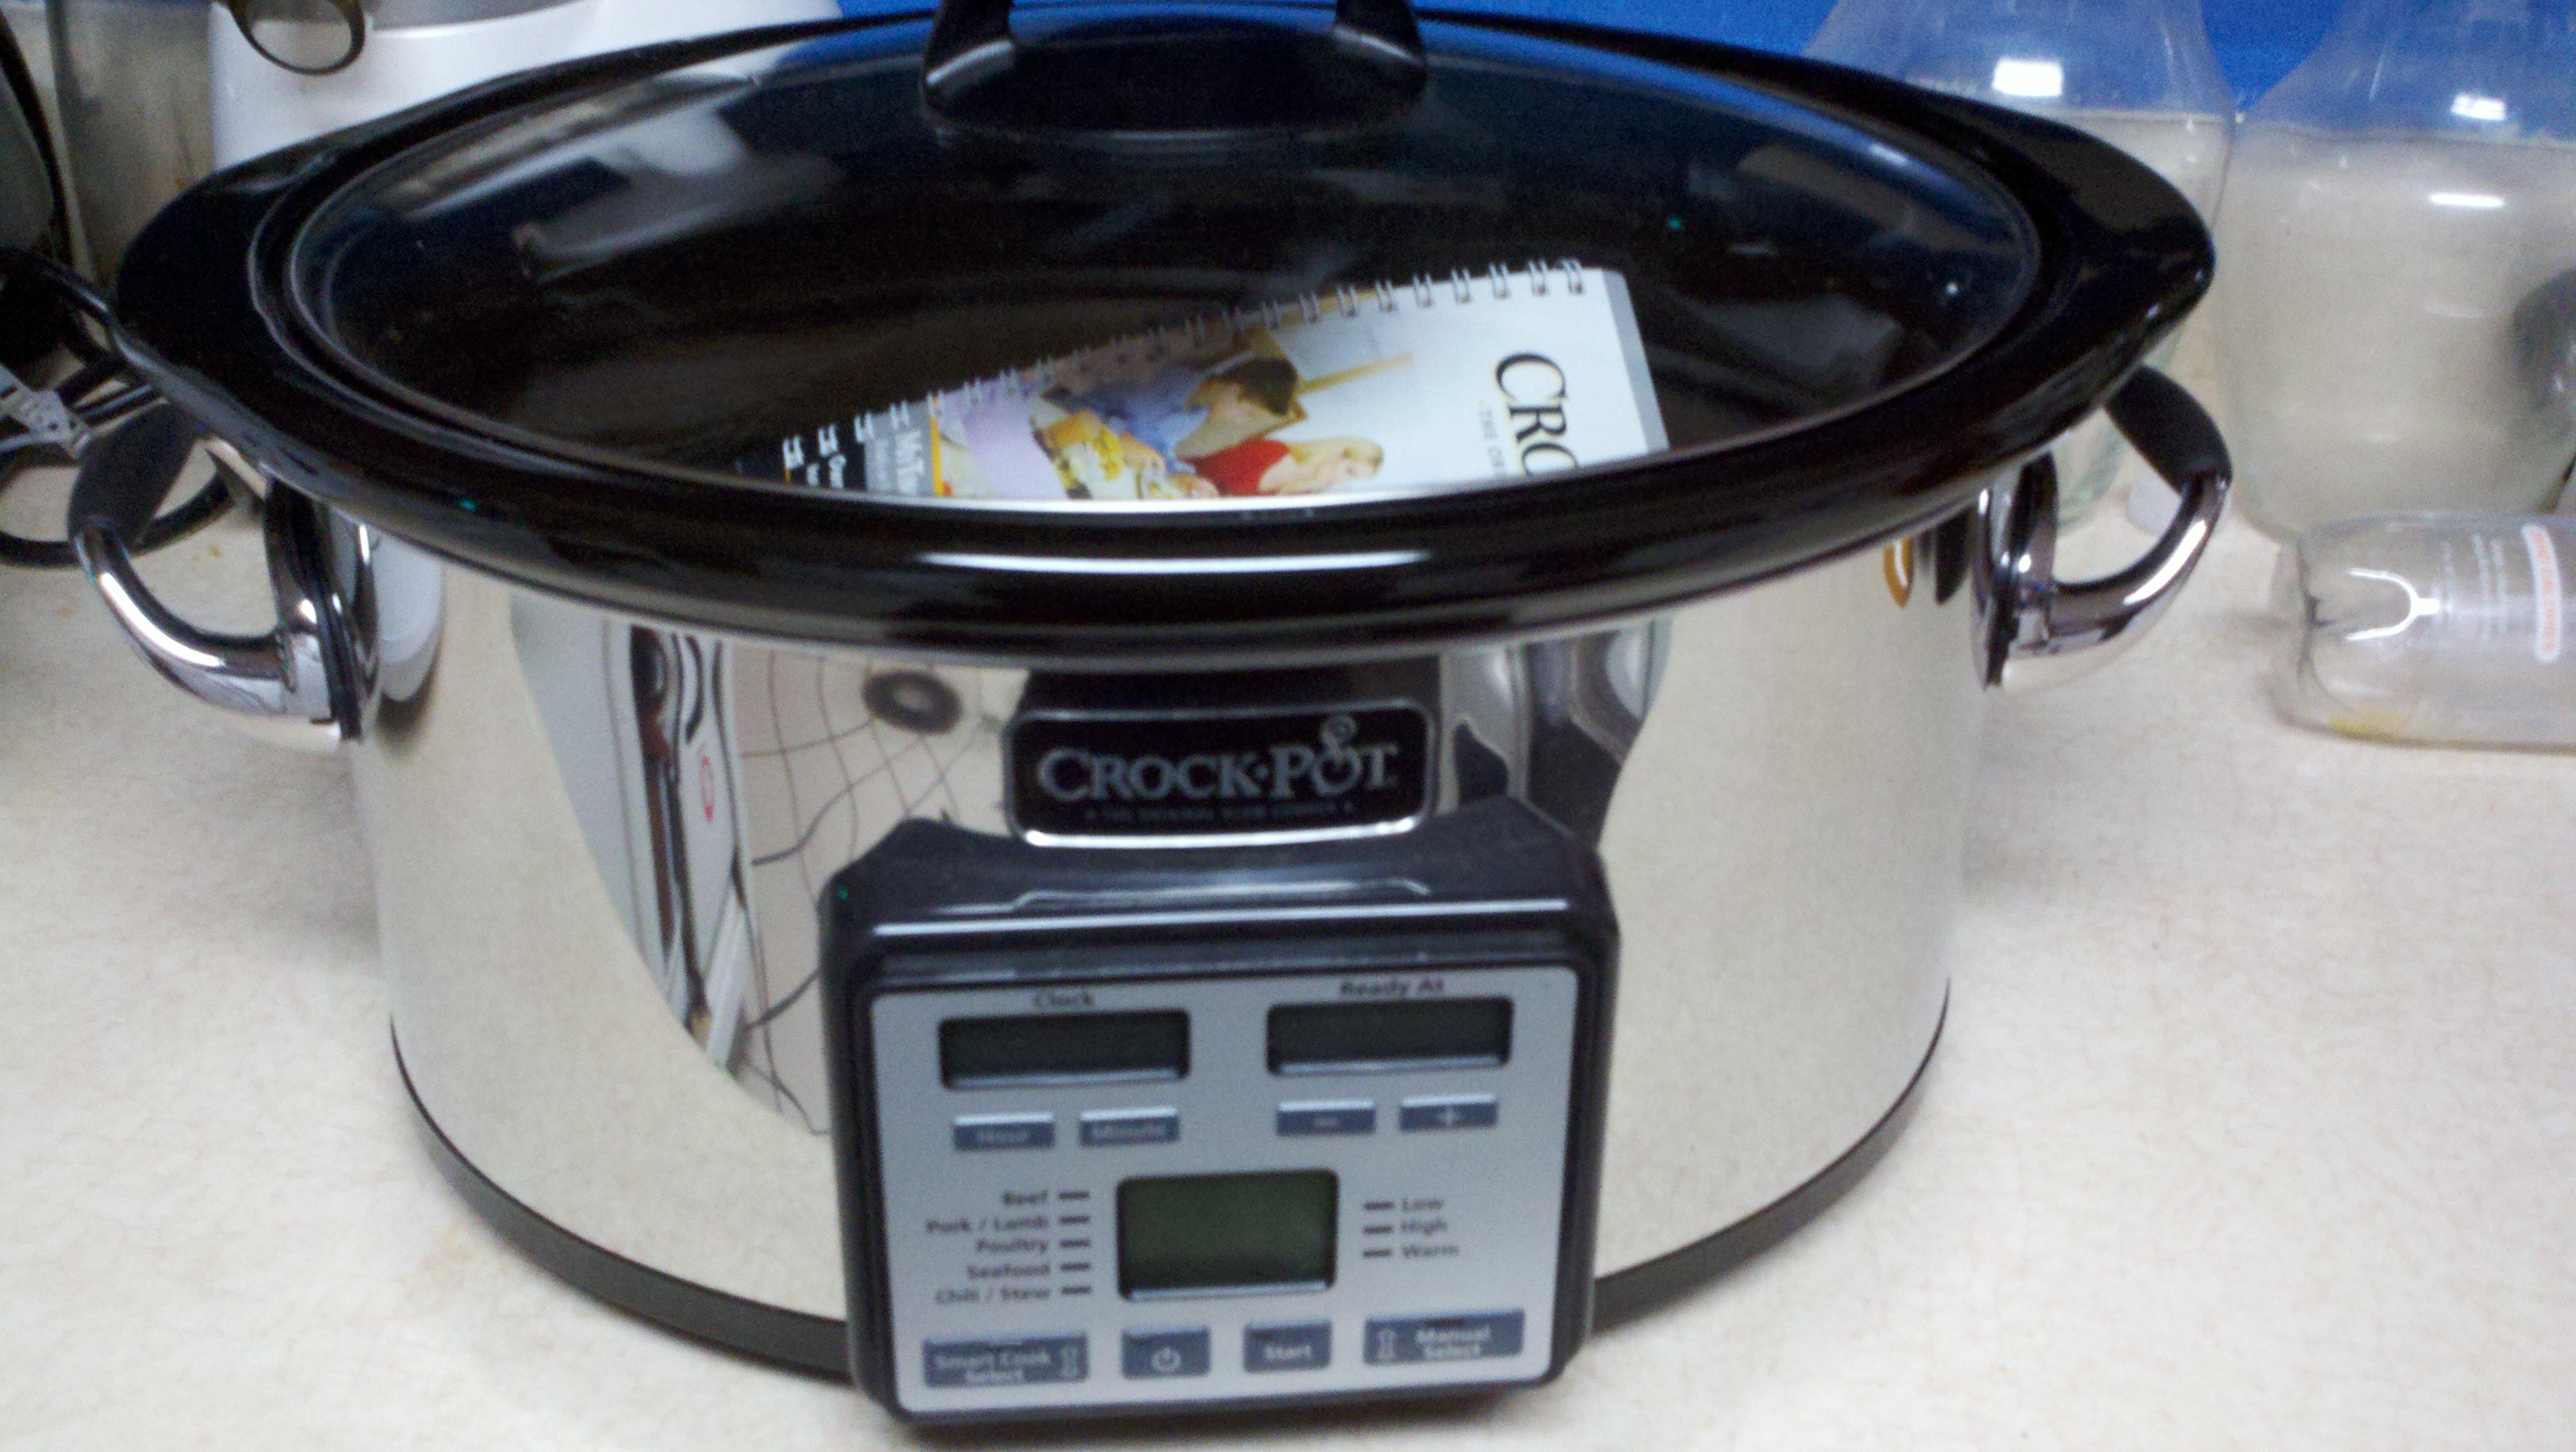 Crockpot 6-Quart Slow Cooker With Mytime Technology, Programmable Slow  Cooker, Stainless Steel